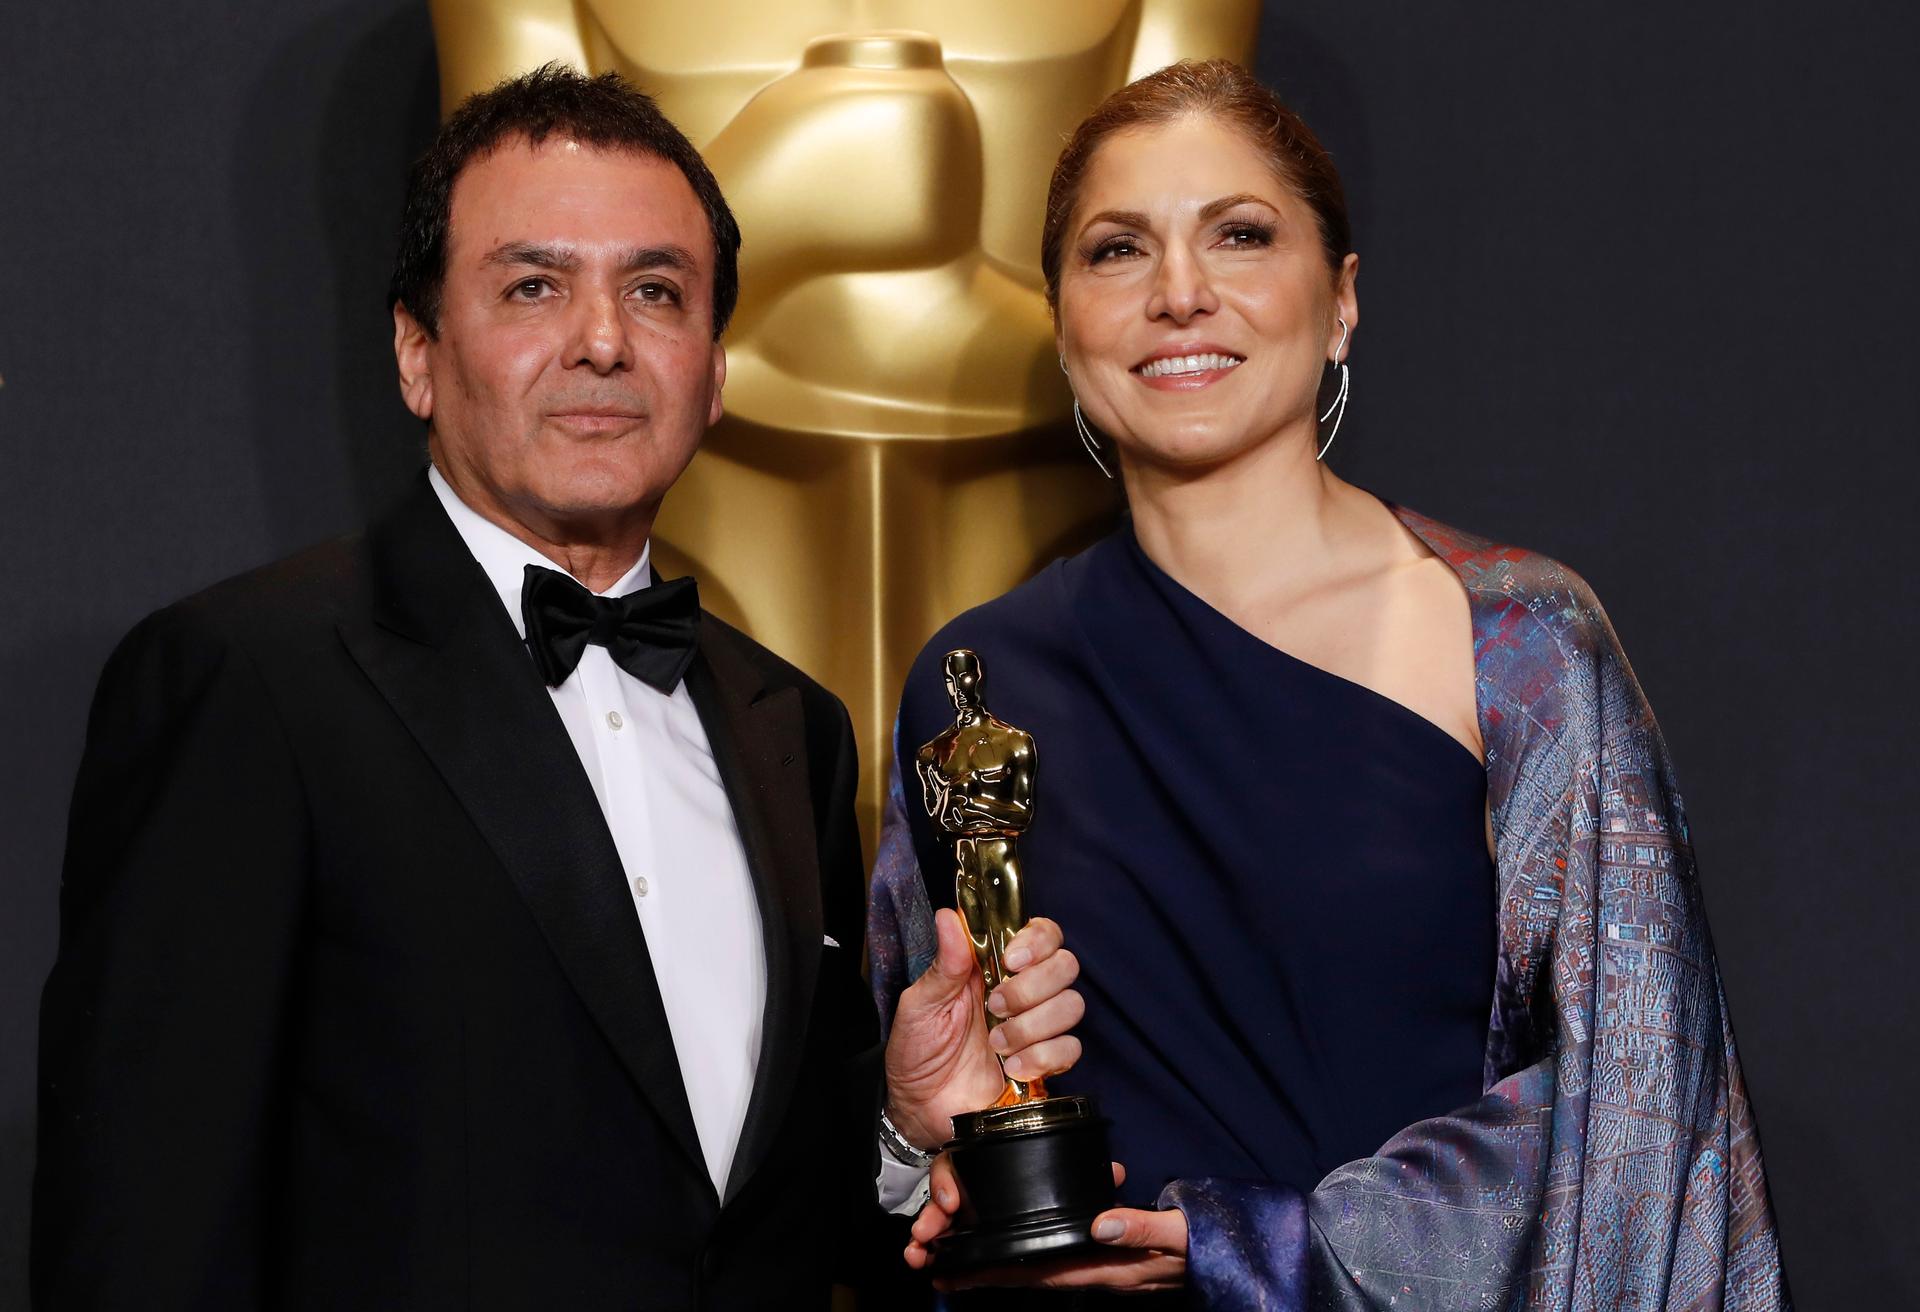 Anousheh Ansari and Firouz Naderi pose with the Oscar they accepted on behalf of Asghar Farhadi, who won the Best Foreign Language Film for "The Salesman". 